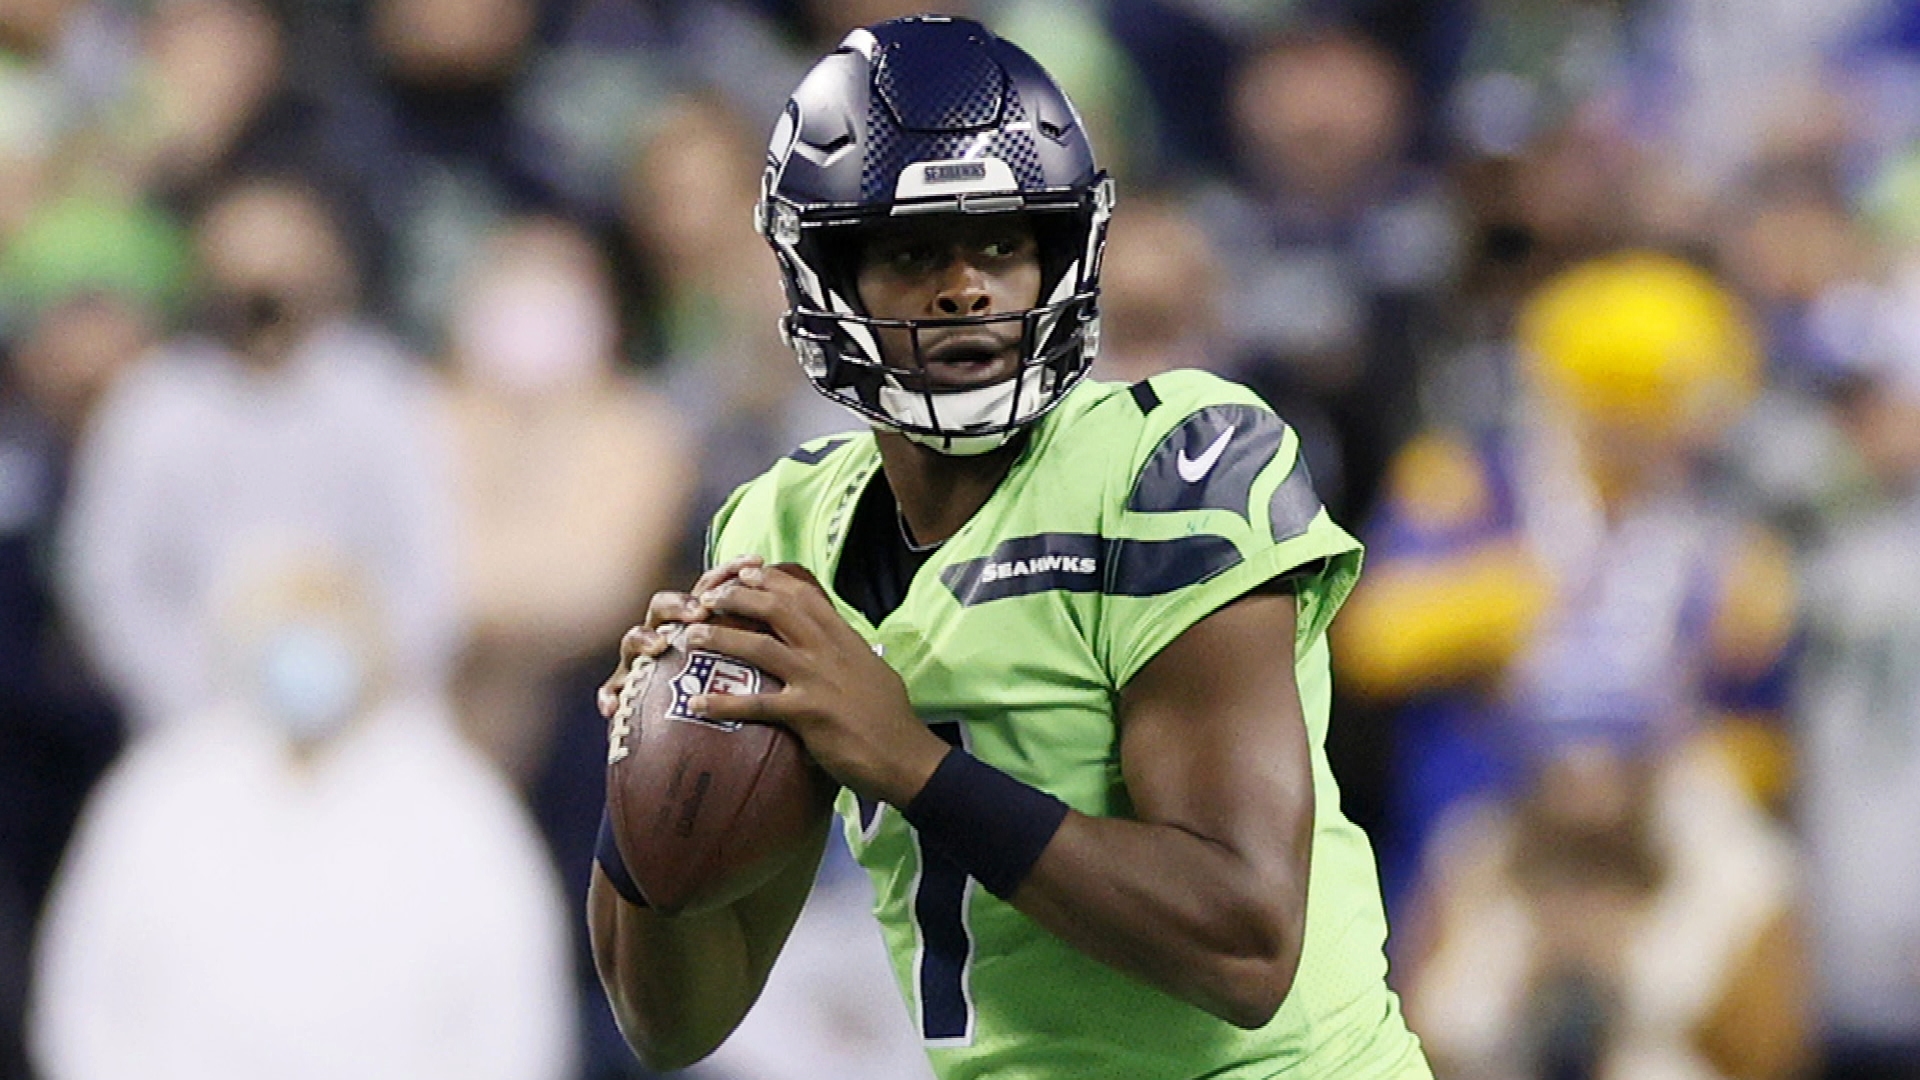 Can Geno Smith play his way into new NFL situation with Seattle Seahawks?